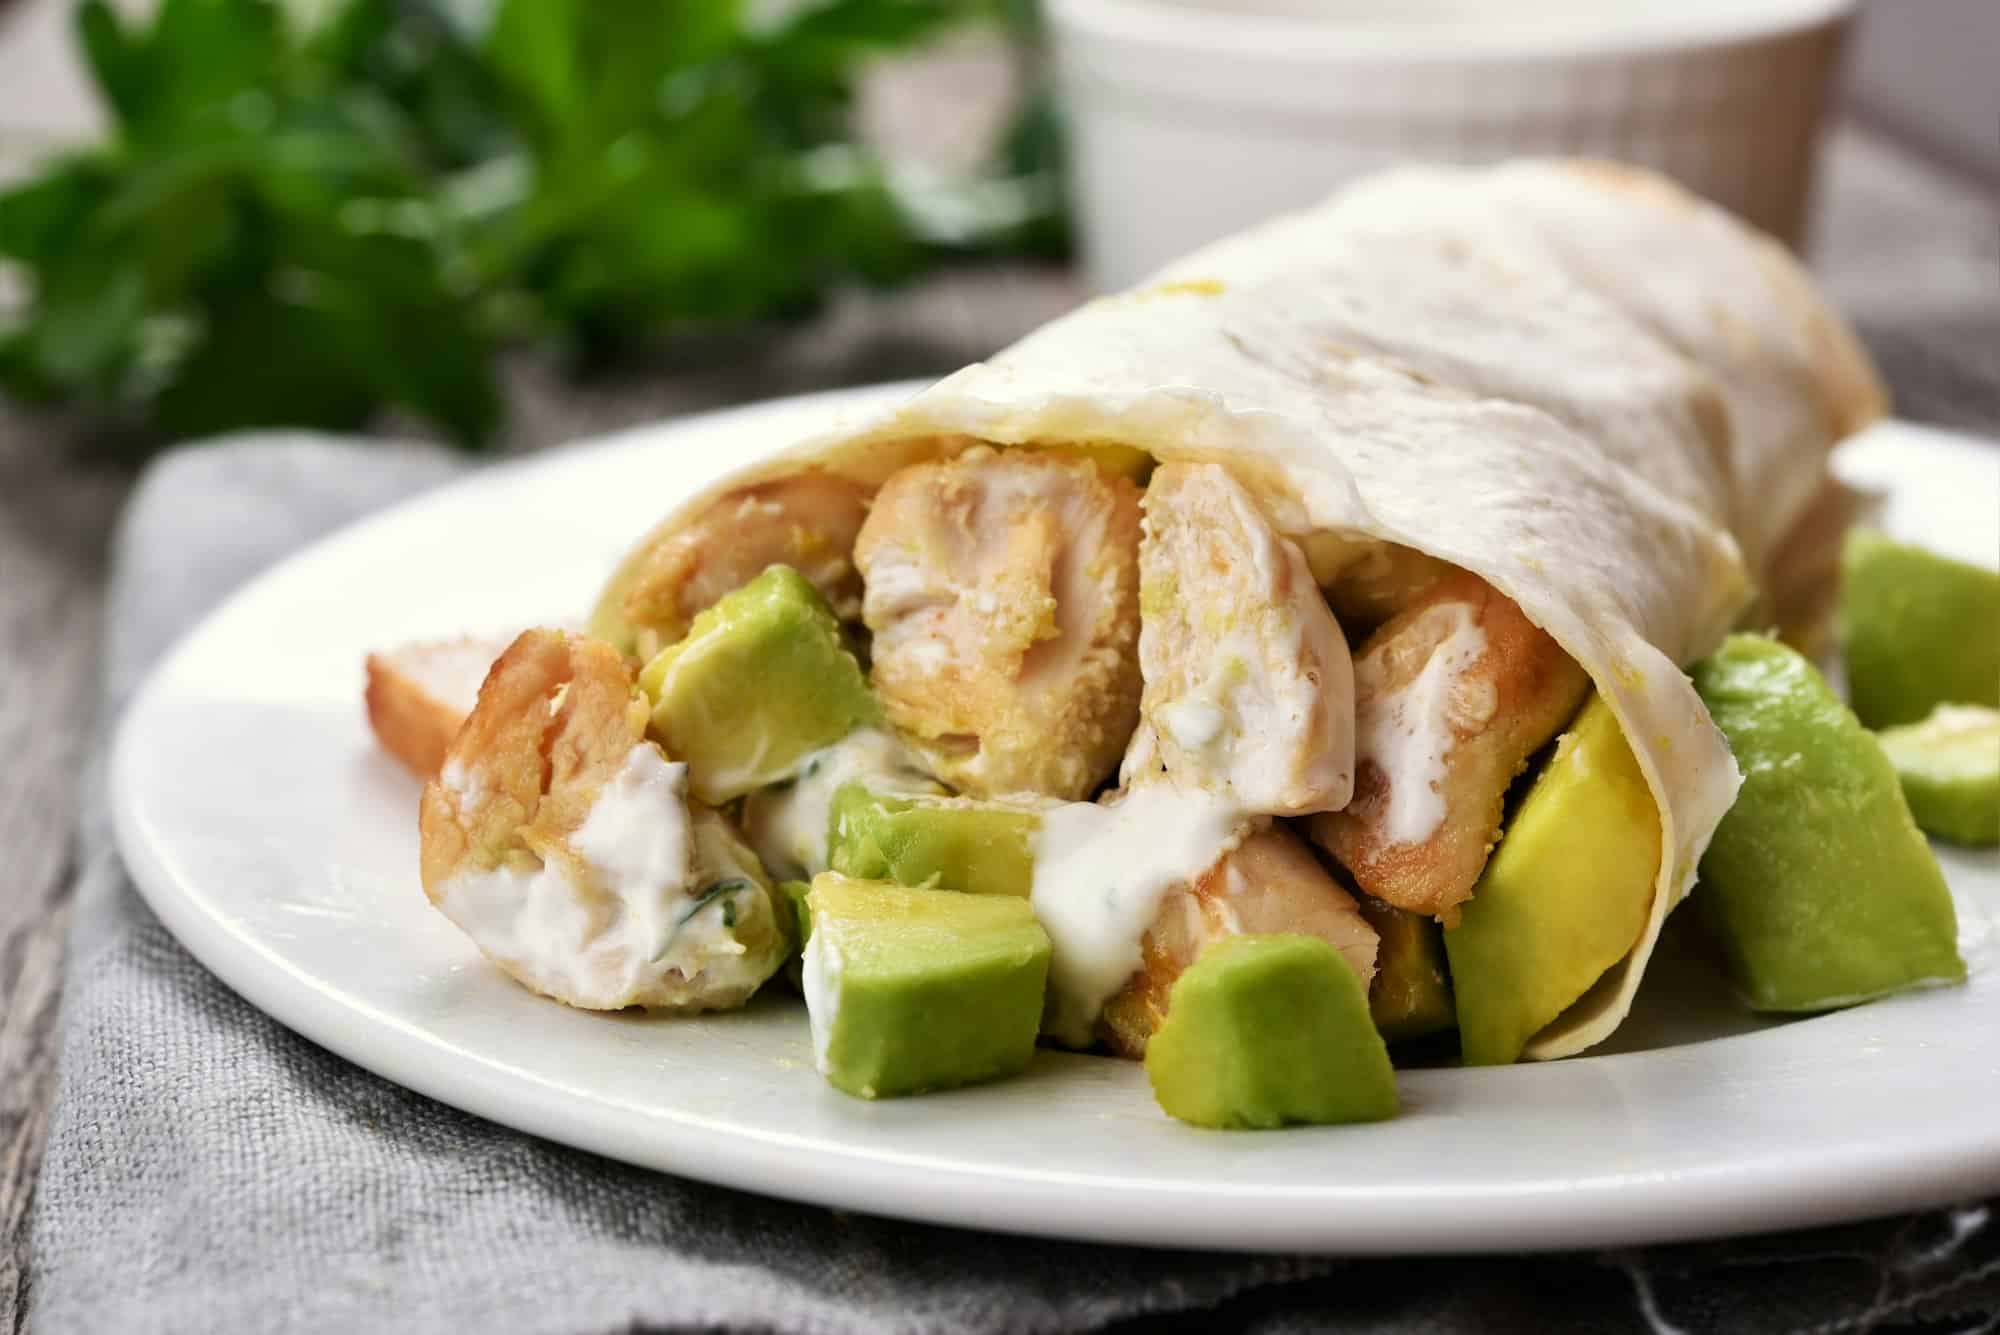 Wrap sandwich with chicken and avocado